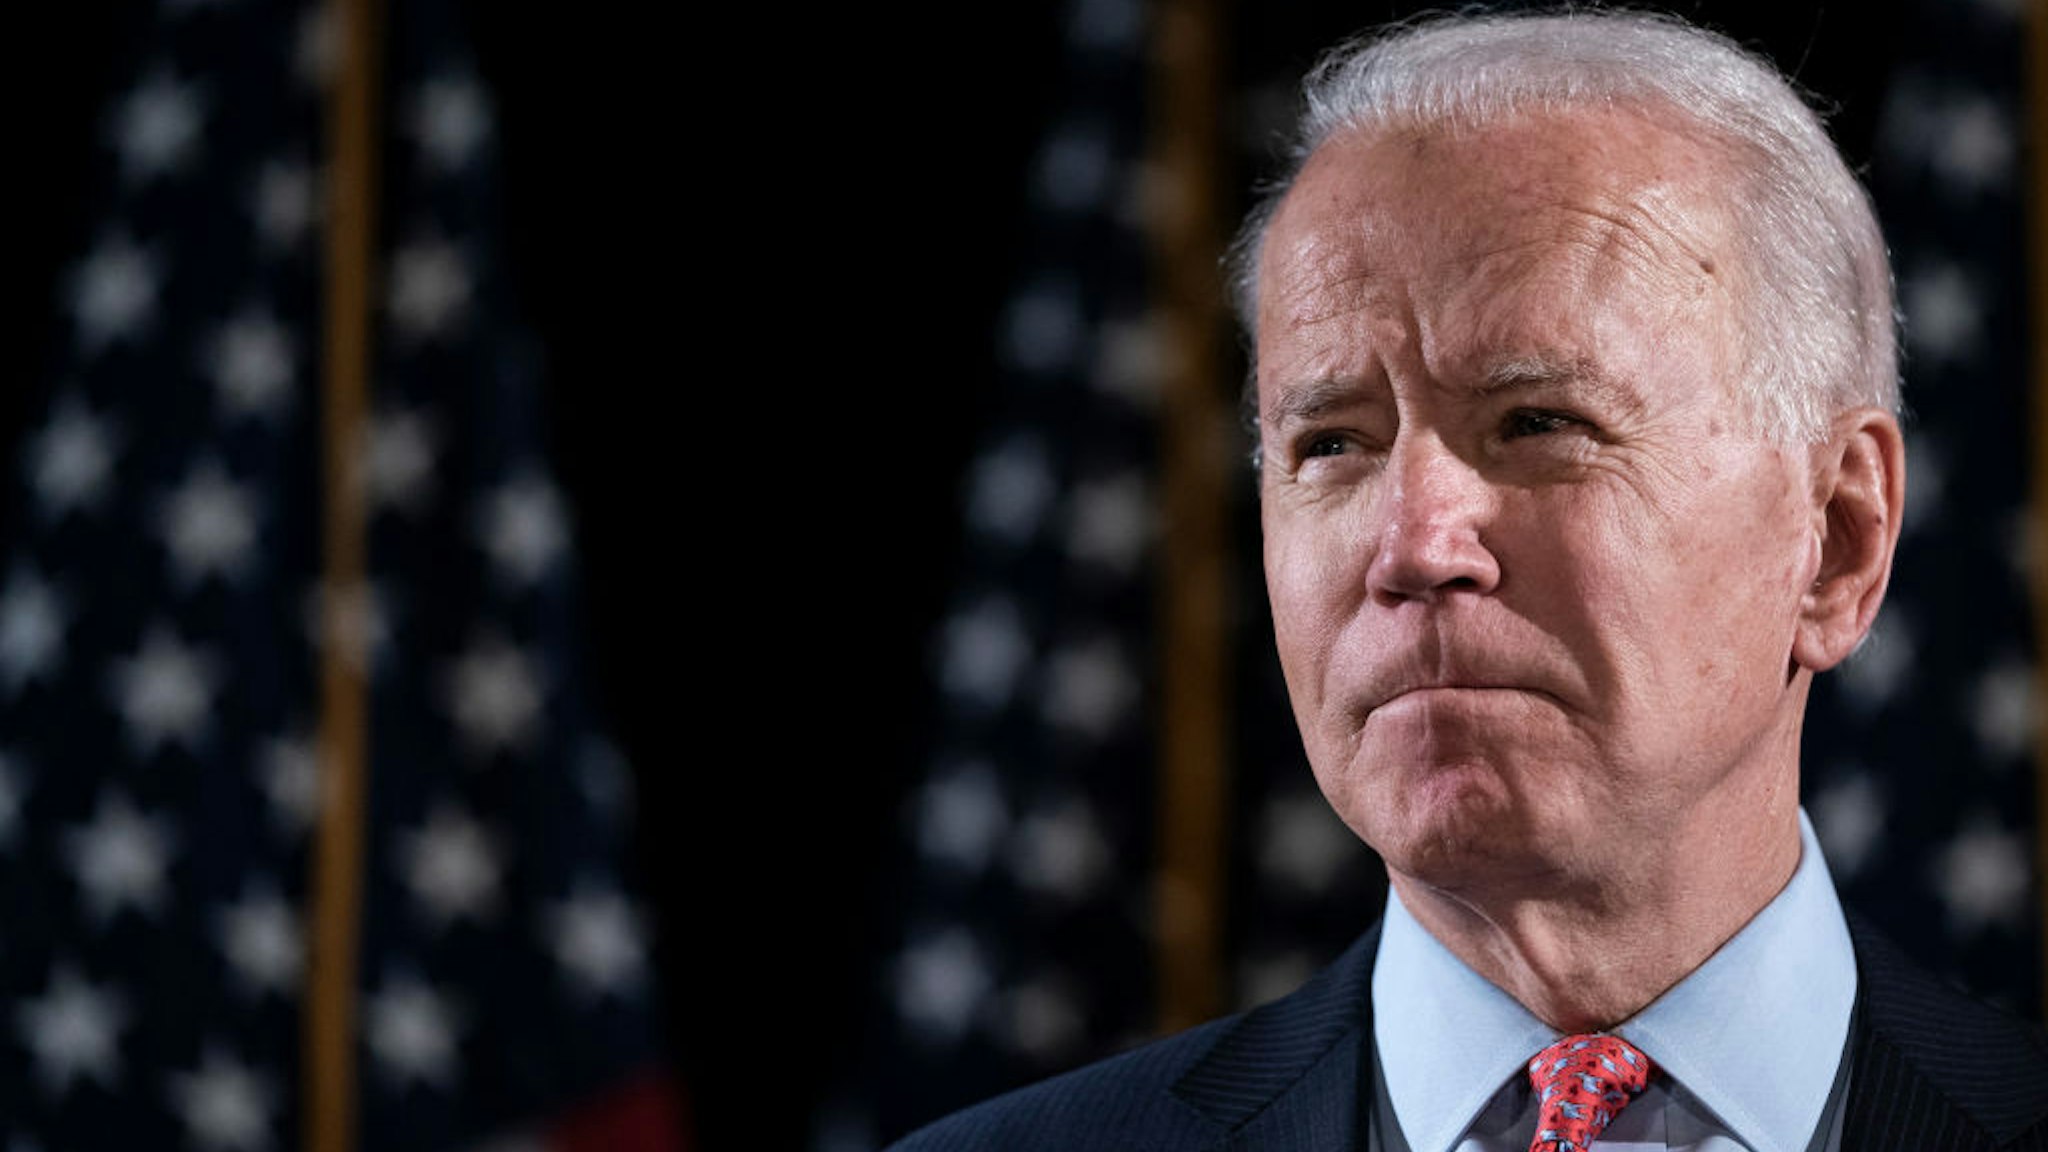 Democratic presidential candidate former Vice President Joe Biden delivers remarks about the coronavirus outbreak, at the Hotel Du Pont March 12, 2020 in Wilmington, Delaware.